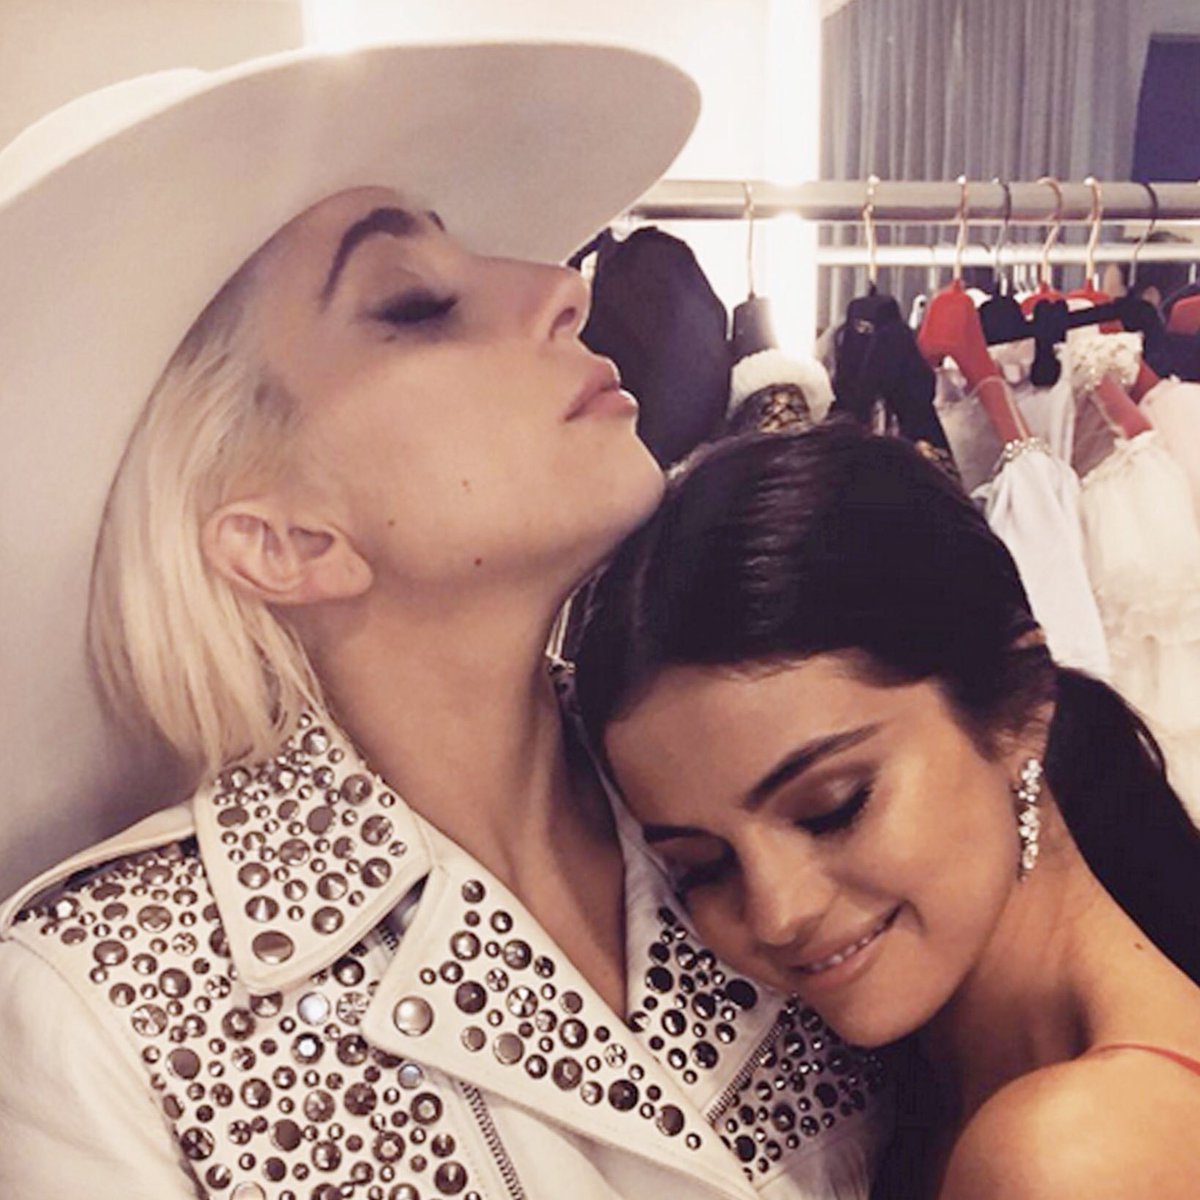 Selena Gomez: "I love Lady Gaga. She's always been so kind to me. I think she's insanely talented, a good woman."